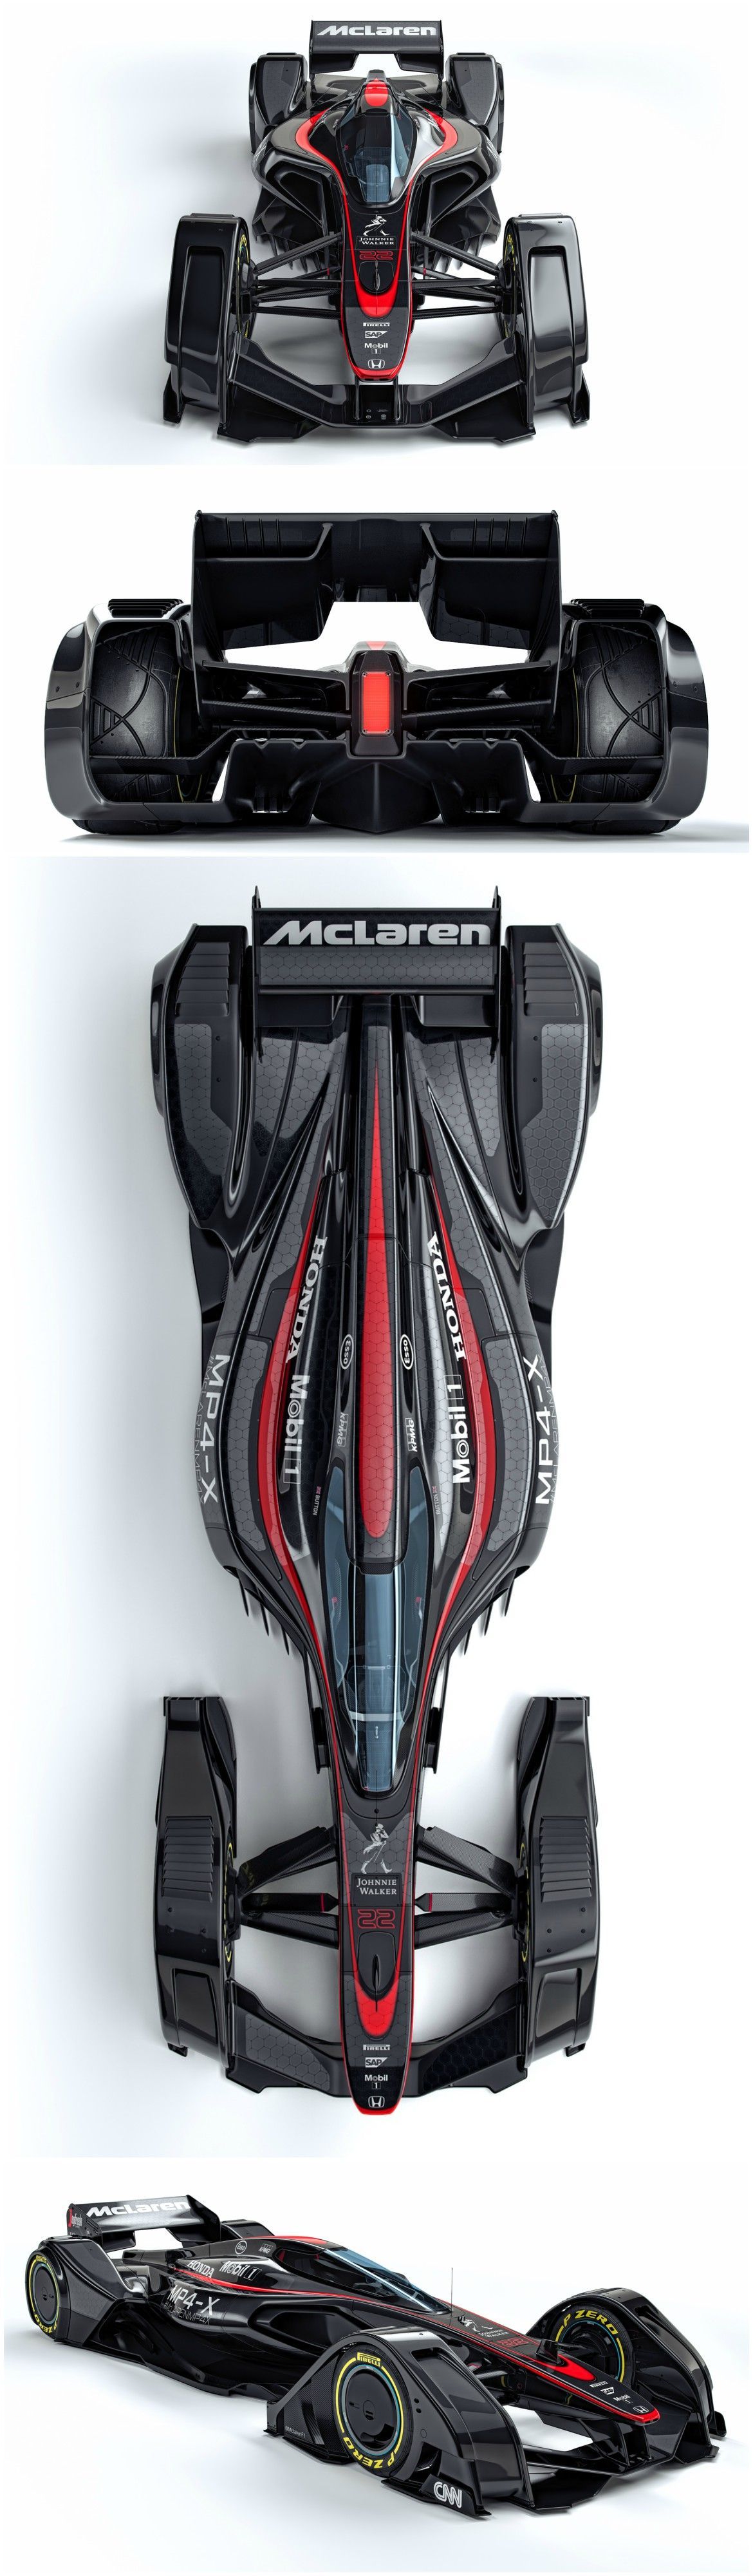 The McLaren MP4-X: McLaren’s conceptual vision for the future of motorsport technology. Modelling th